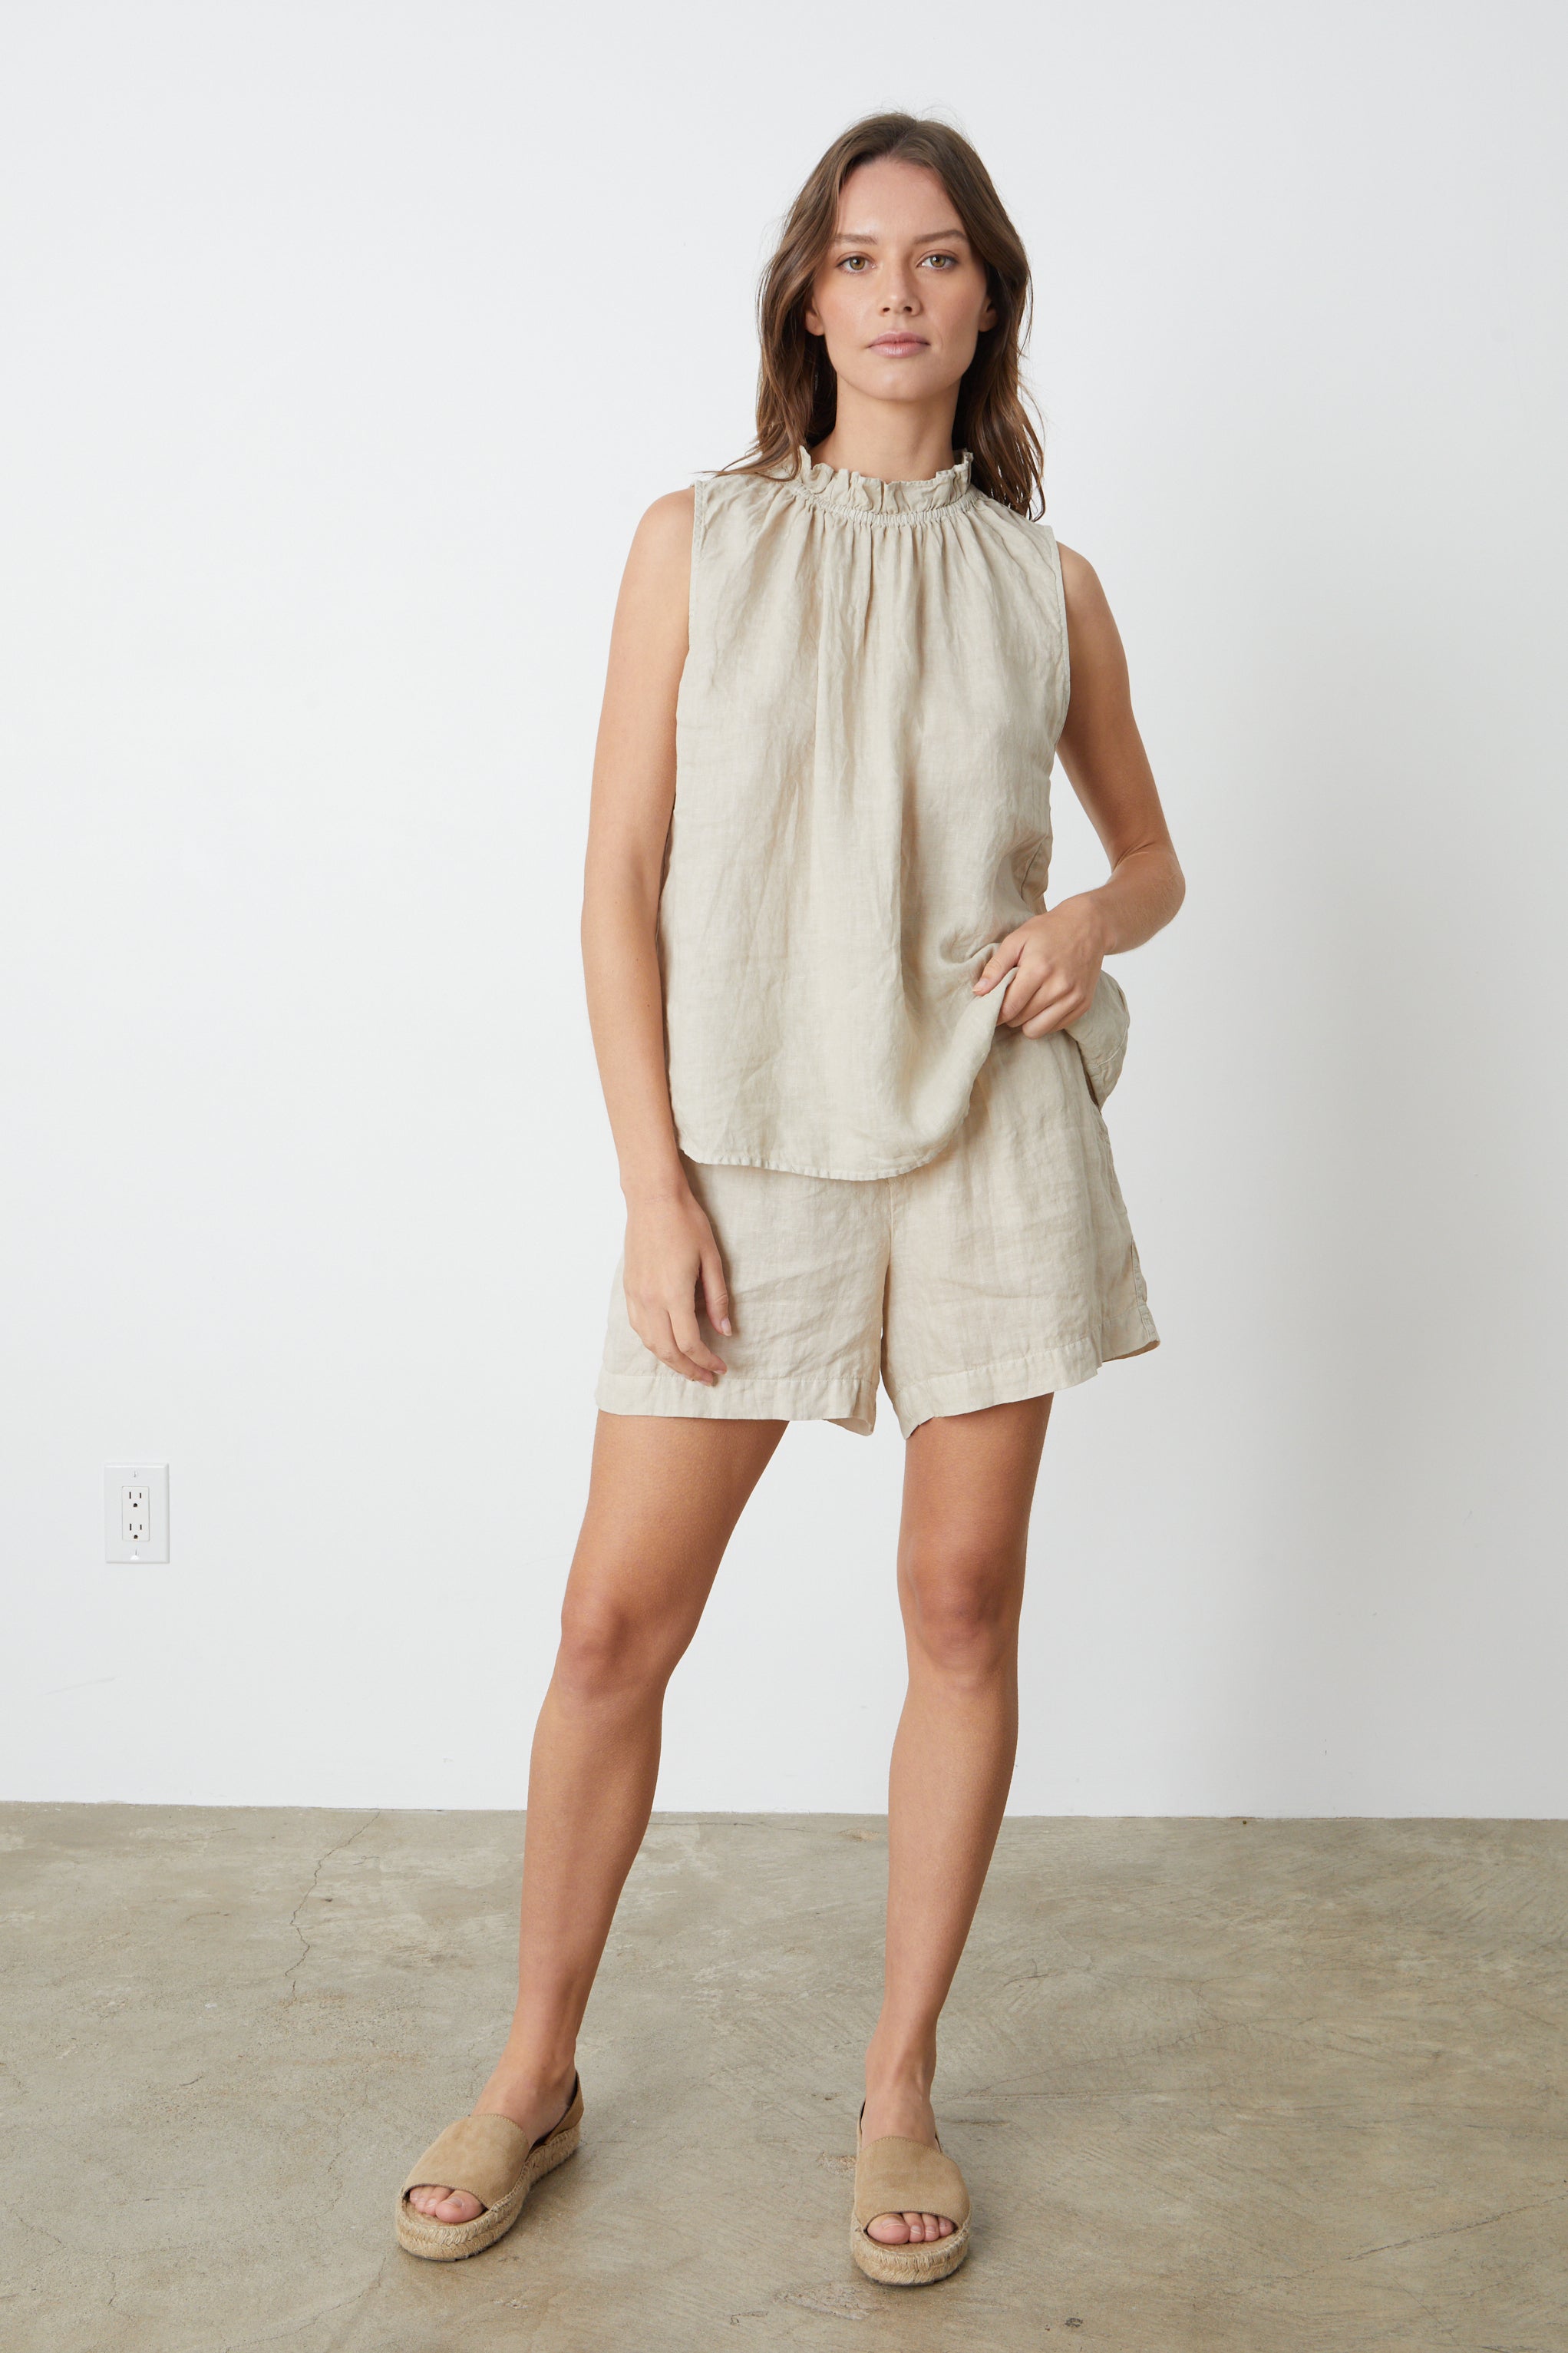   A woman wearing a sleeveless NOVA LINEN TOP by Velvet by Graham & Spencer and shorts in sand full length front shot with sandals. 